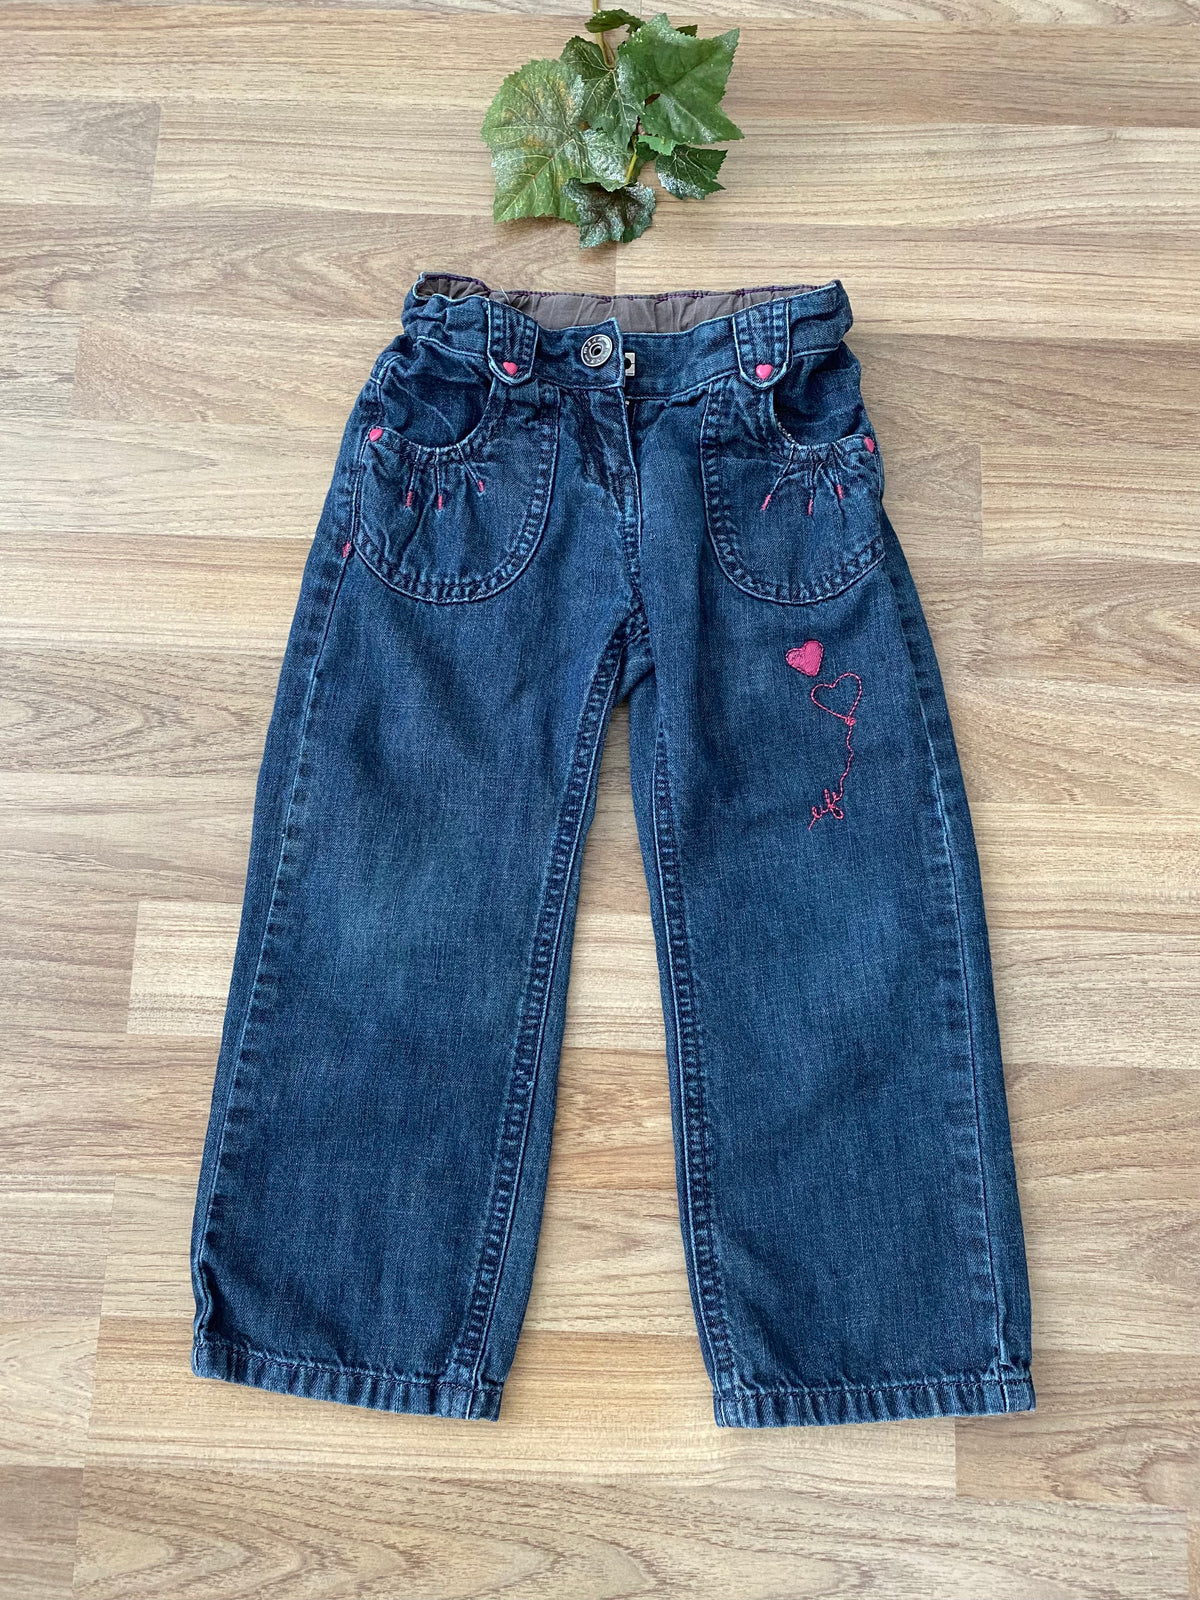 Jeans (Girls Size 4)